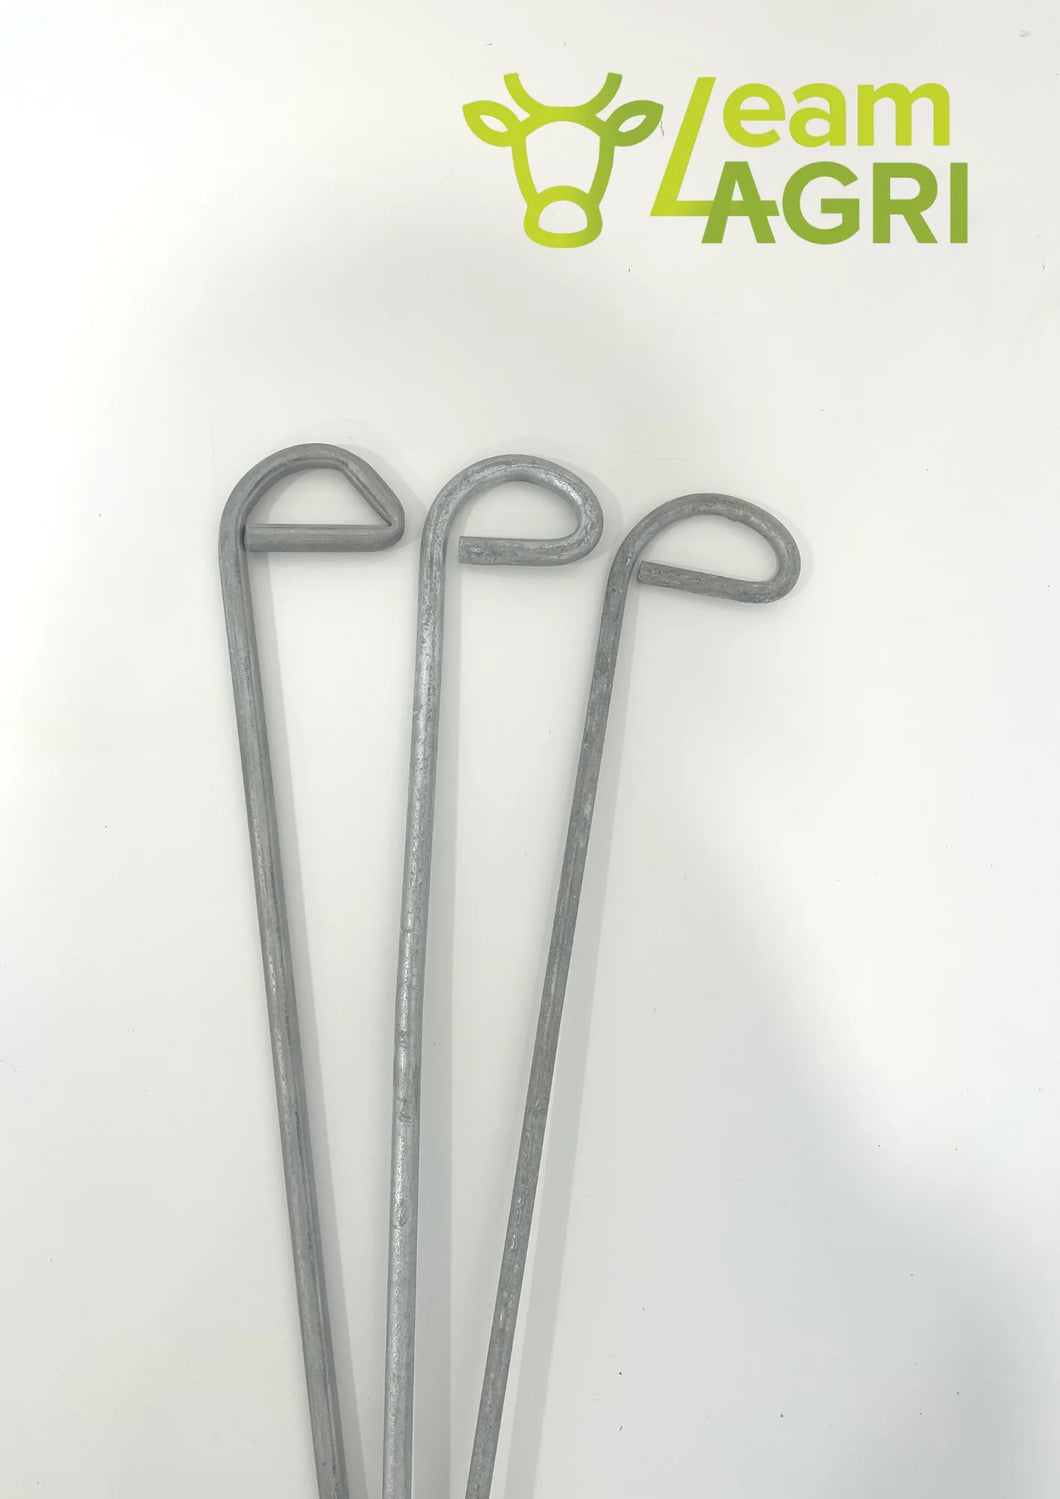 Sheep Hurdle Drop Pins from Leam Agri Ltd, Tempo, County Fermanagh, Northern Ireland. Serving Fermanagh, Tyrone, Antrim, Down, Londonderry, Armagh, Cavan, Leitrim, Sligo, Monaghan, Donegal, Dublin Carlow, Clare, Cork, Galway, Kerry, Kildare, Kilkenny, Laois, Limerick, Longford, Louth, Mayo, Meath, Monaghan, Offaly, Roscommon, Tipperary, Waterford, Westmeath, Wexford and Wicklow and throughout the United Kingdom